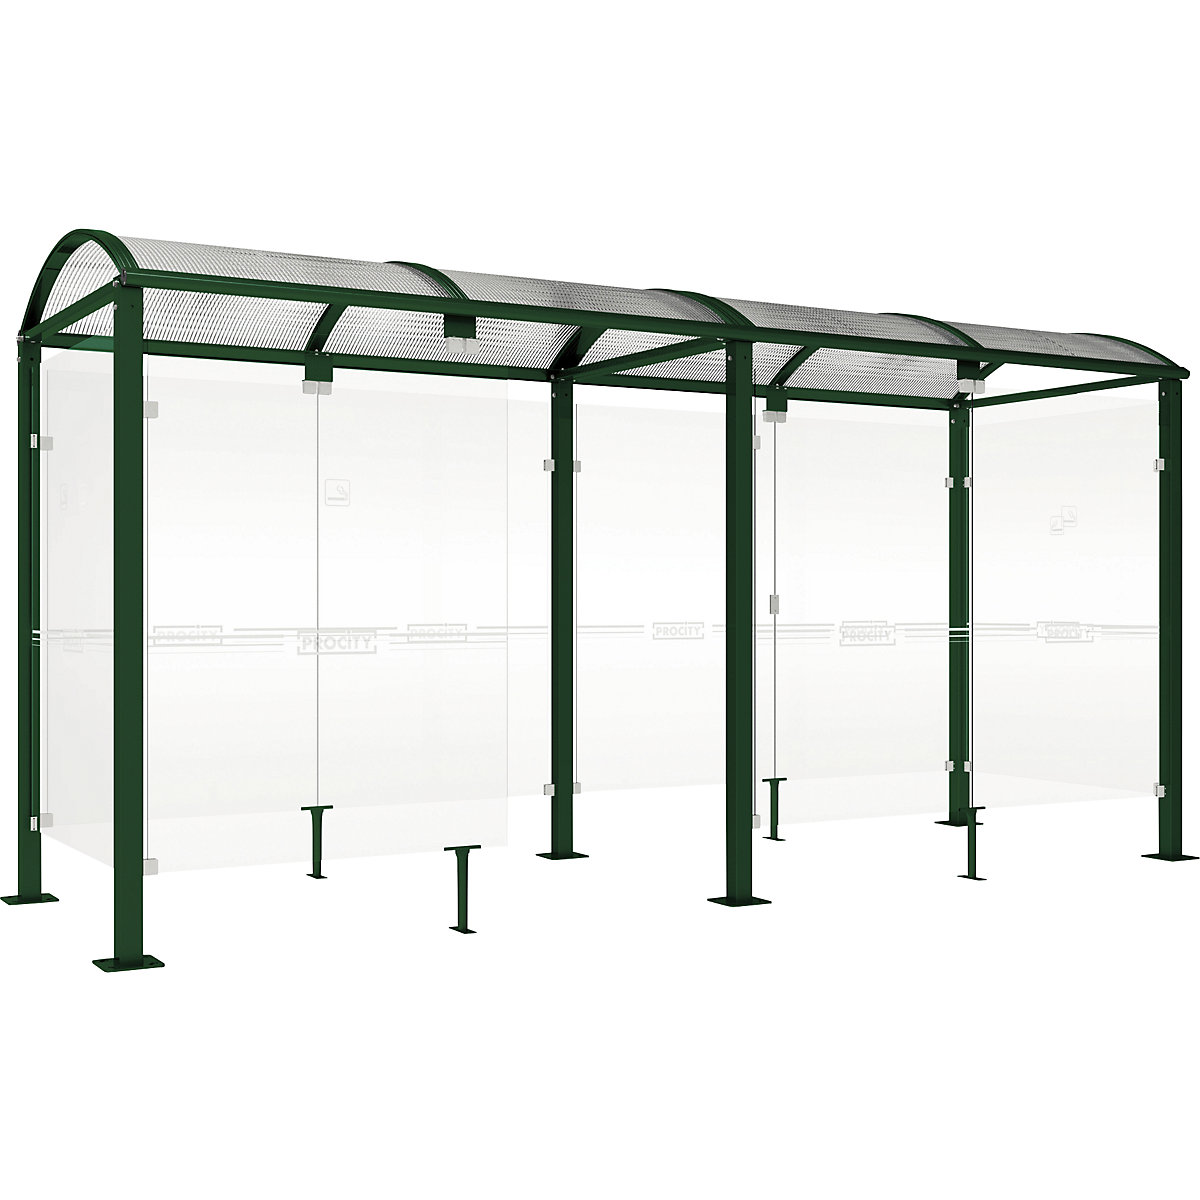 KLASSIK smokers' shelter – PROCITY, with cladding, width 5040 mm, moss green-1